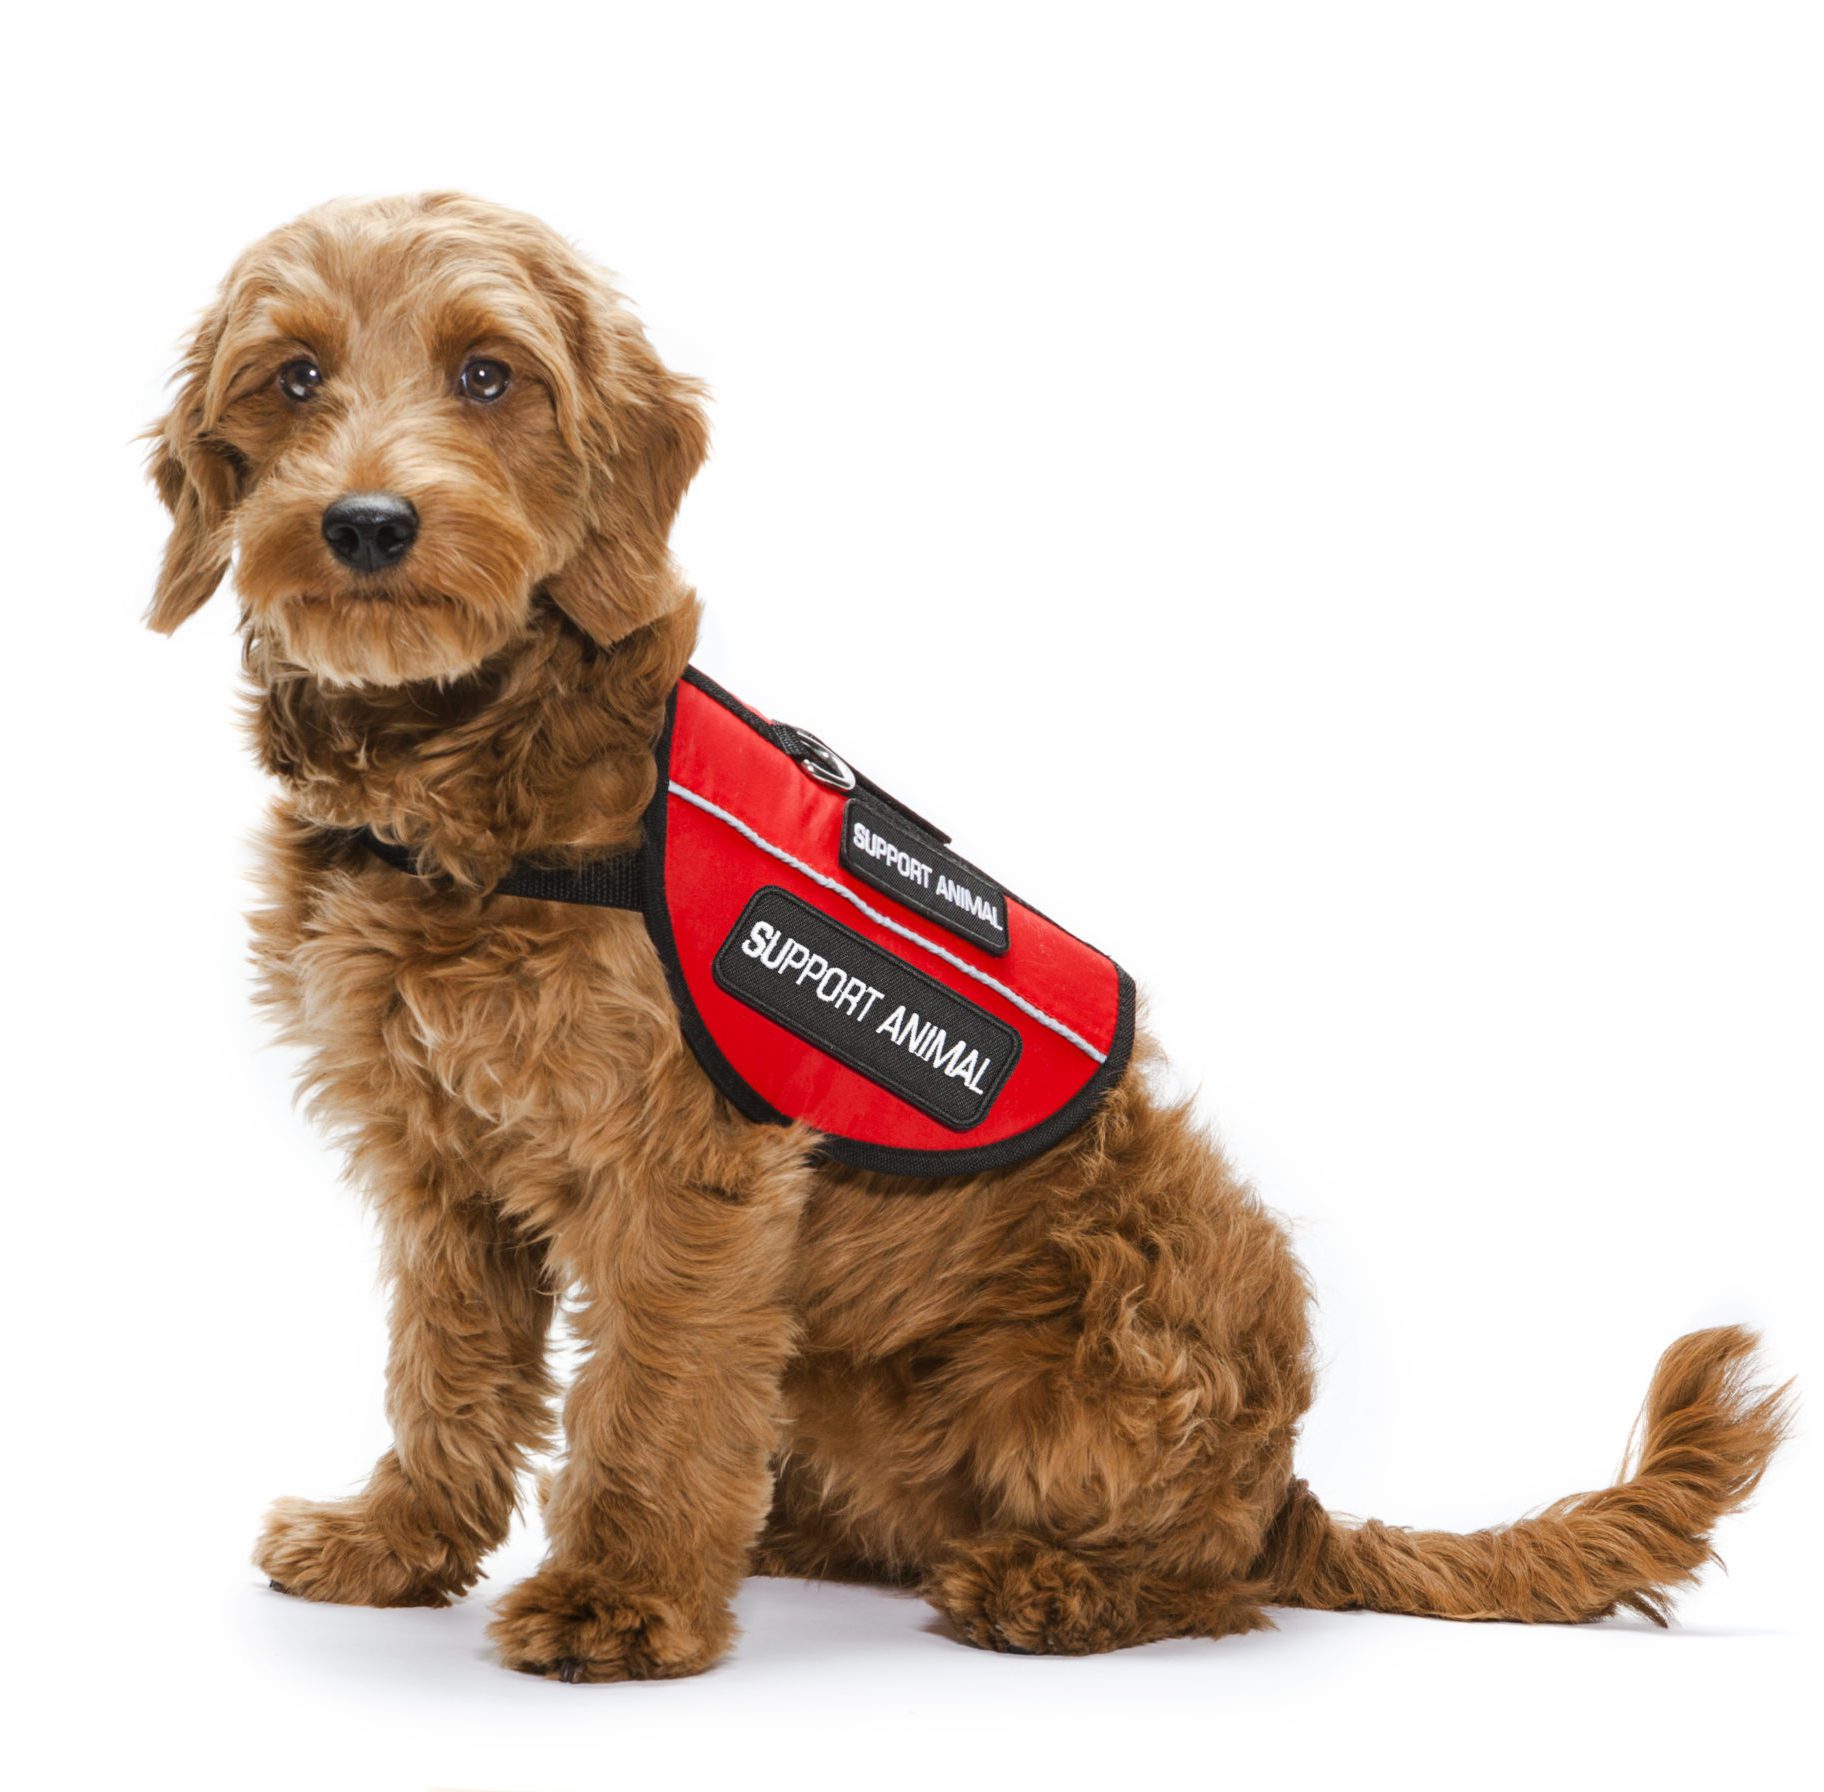 image is of an emotional support animal/emotional support dog